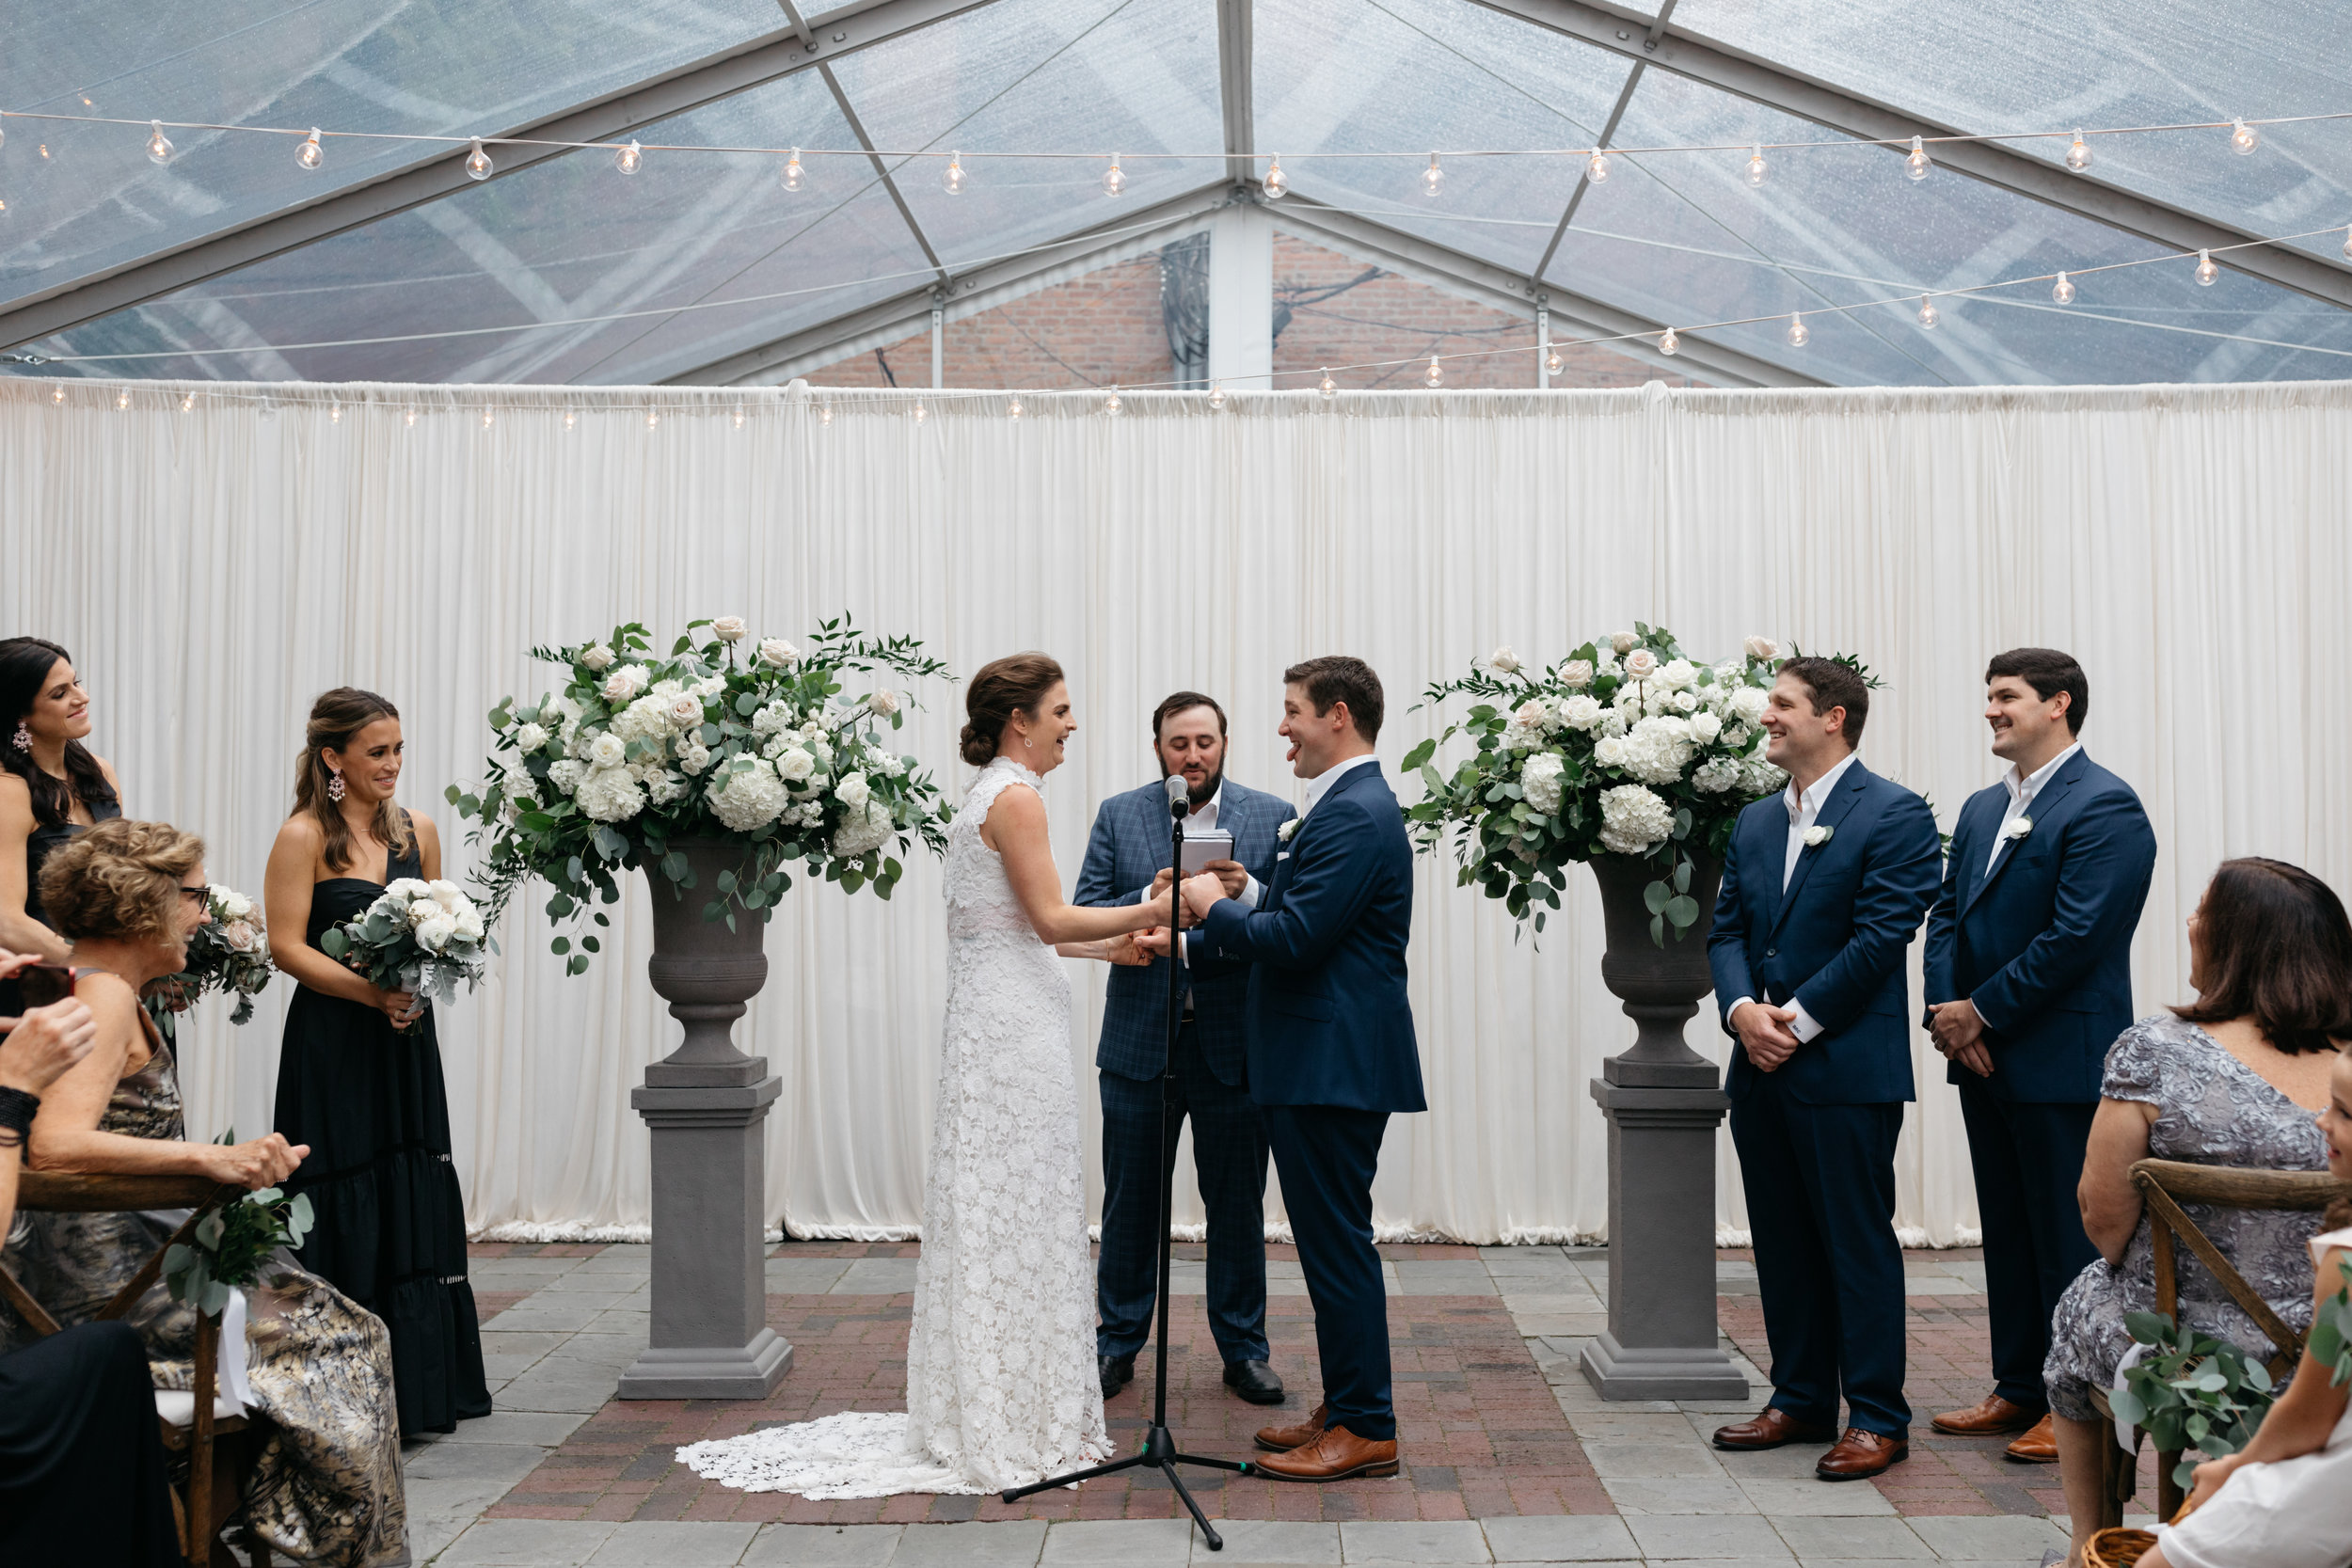 Your Day by MK - Kate & Andrew: Chicago Illuminating Company Wedding